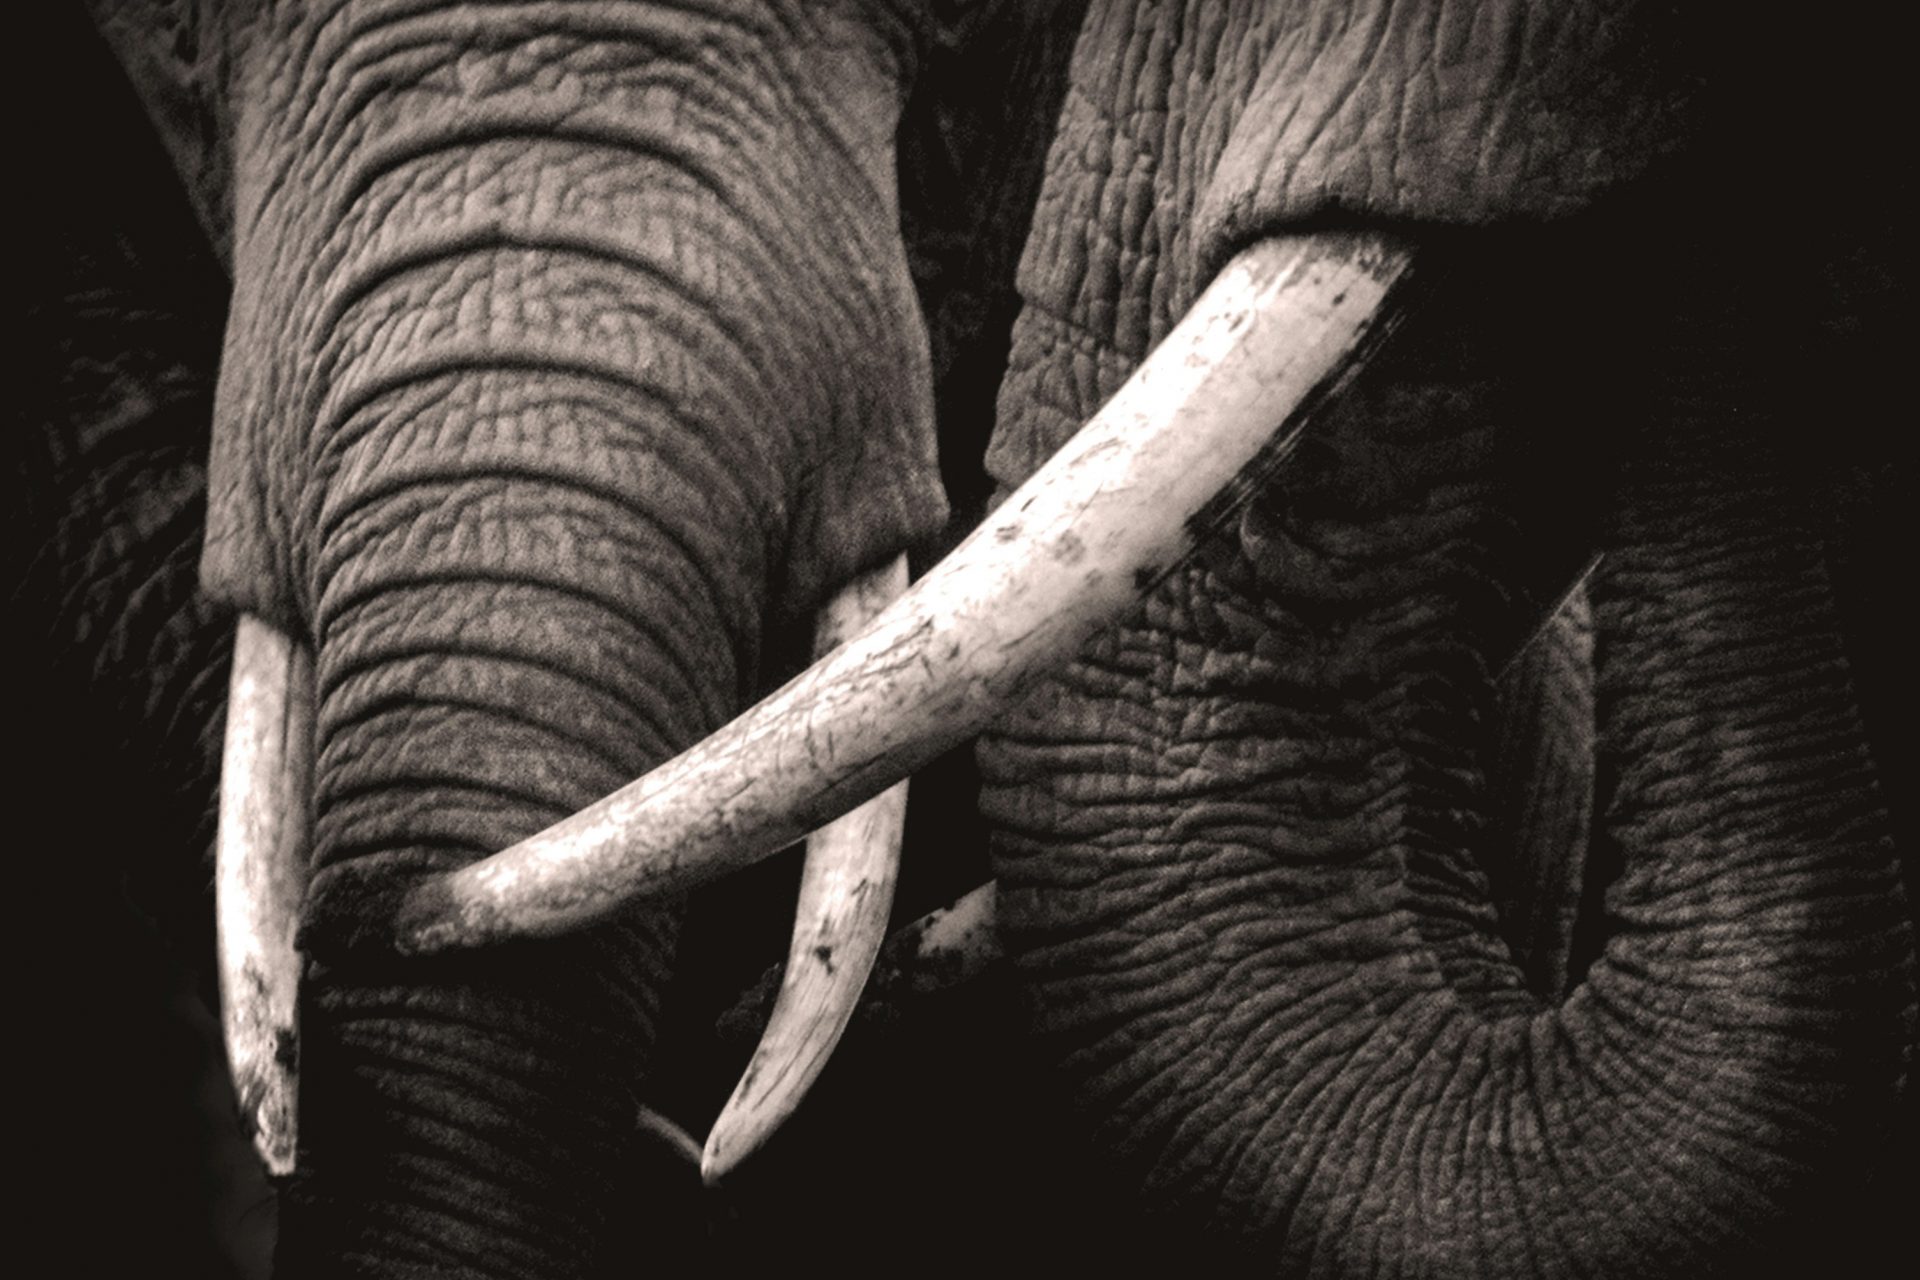 Poaching for ivory and habitat loss 